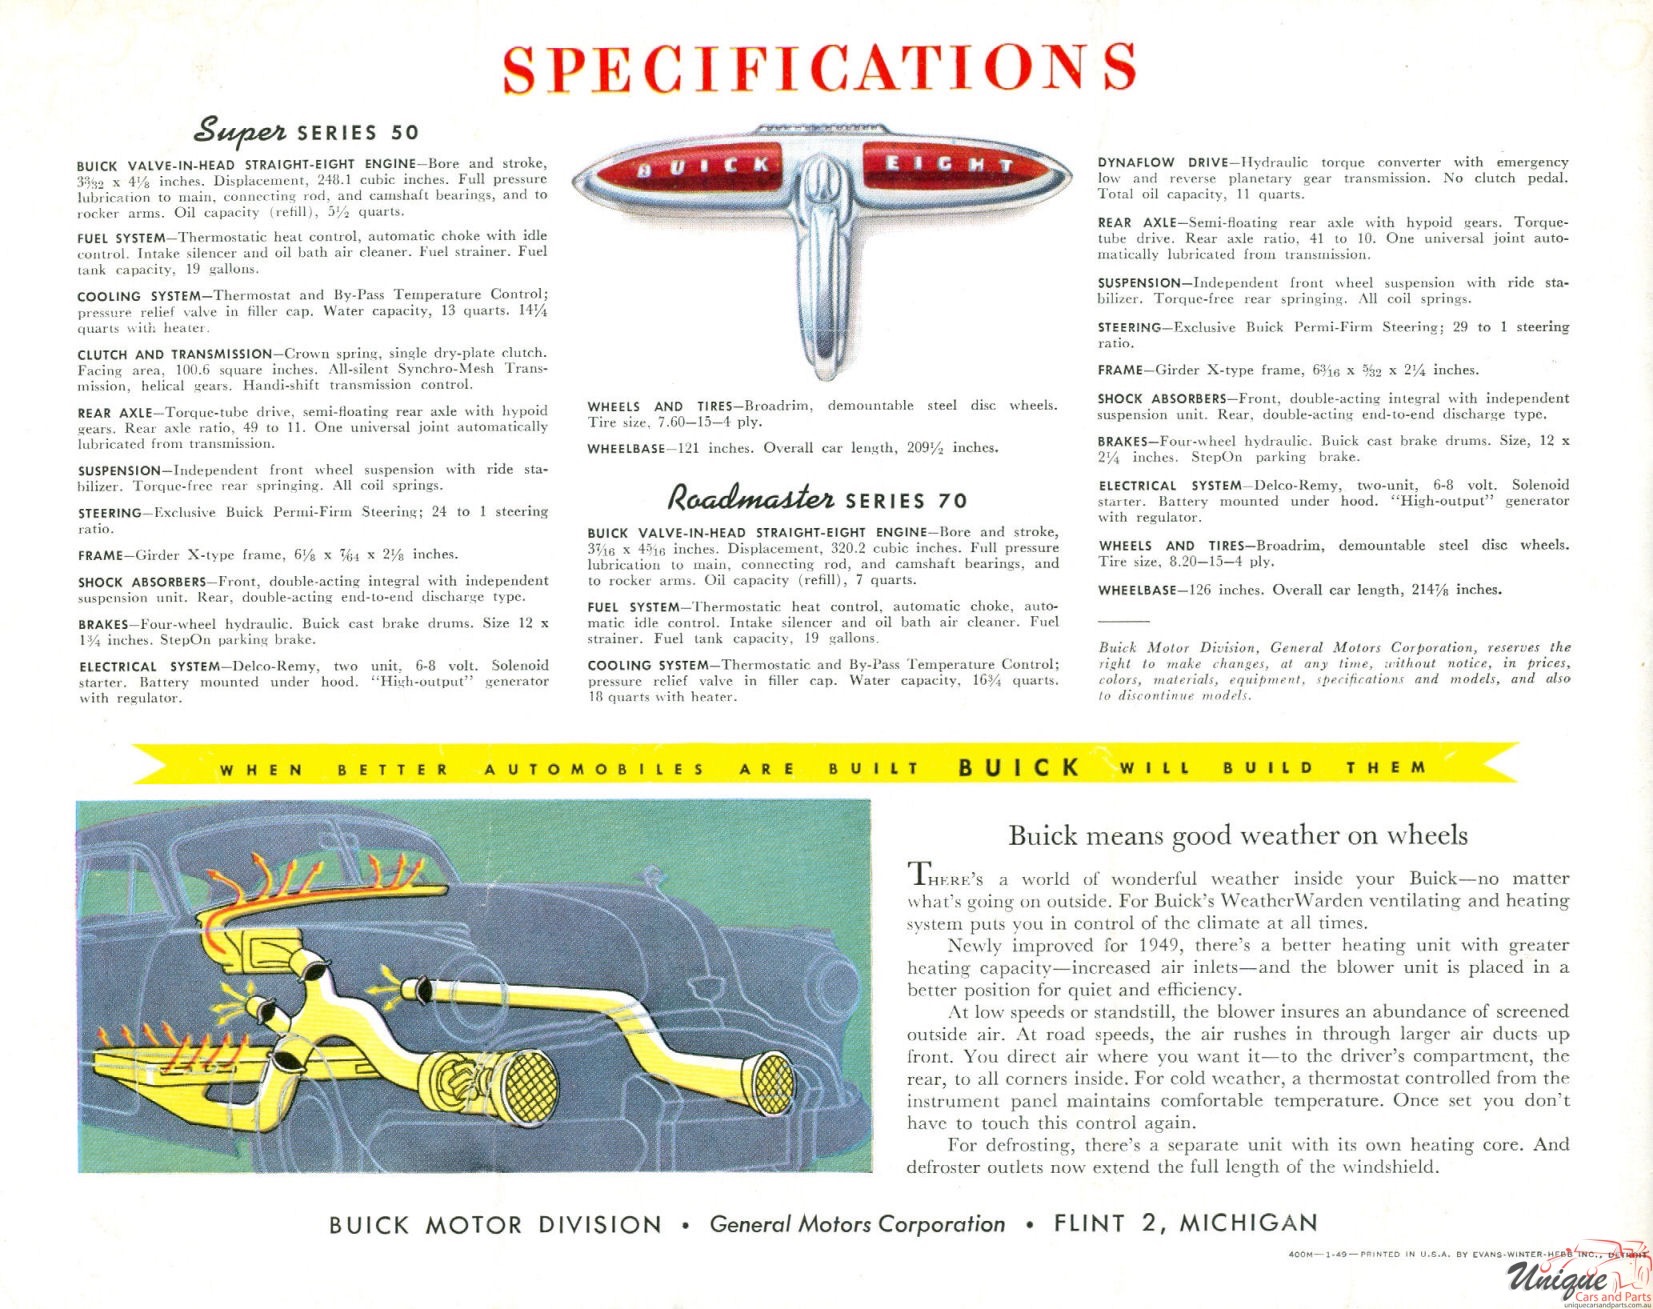 1949 Buick Brochure Page 10